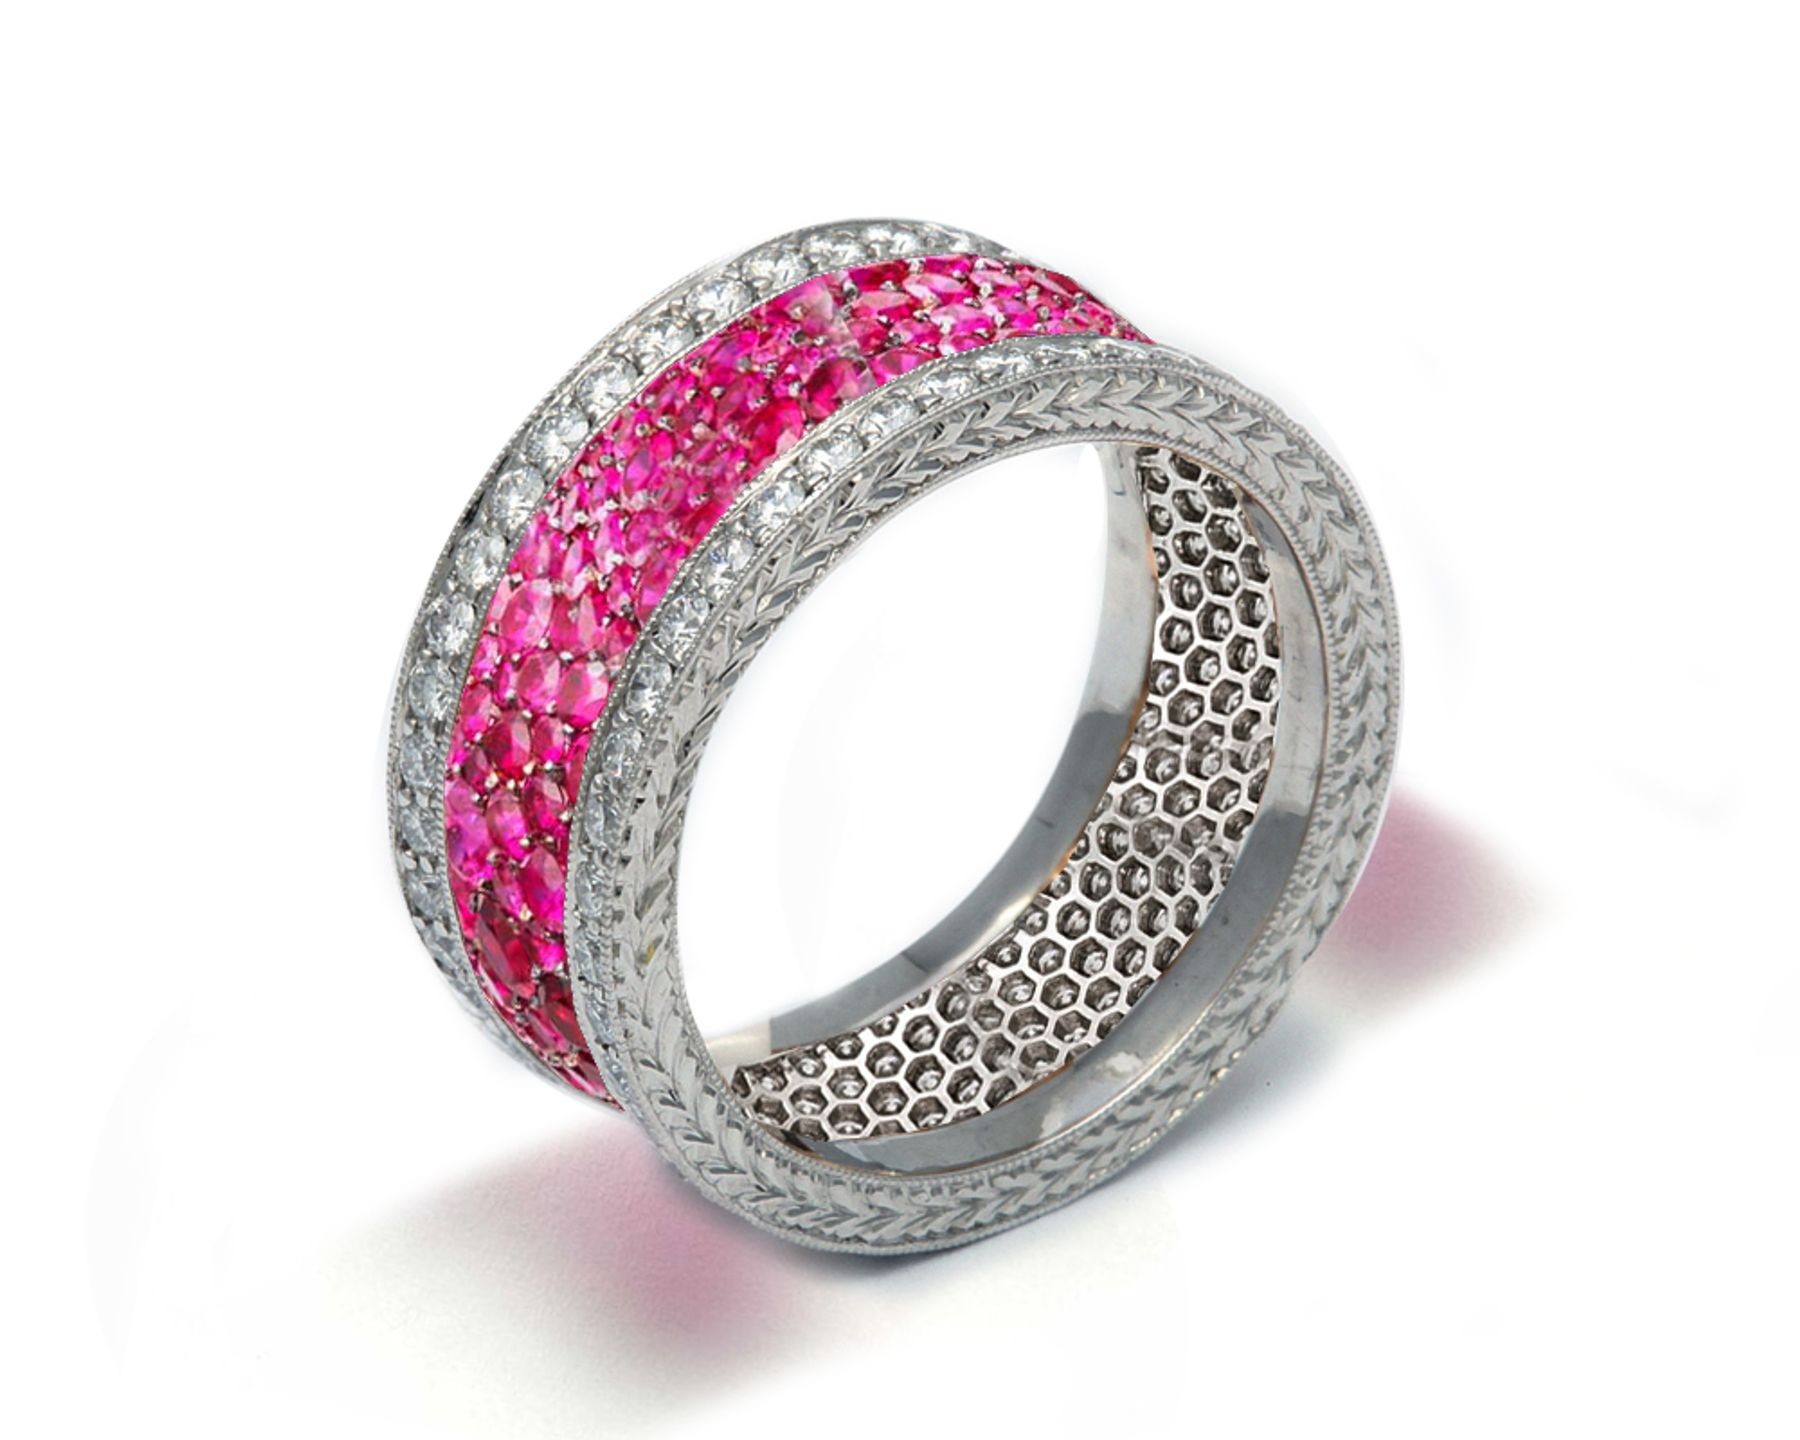 Delicate Women's Eternity Rings Featuring Fiery Red Rubies & Diamonds in Halo Precision Micro pave Settings